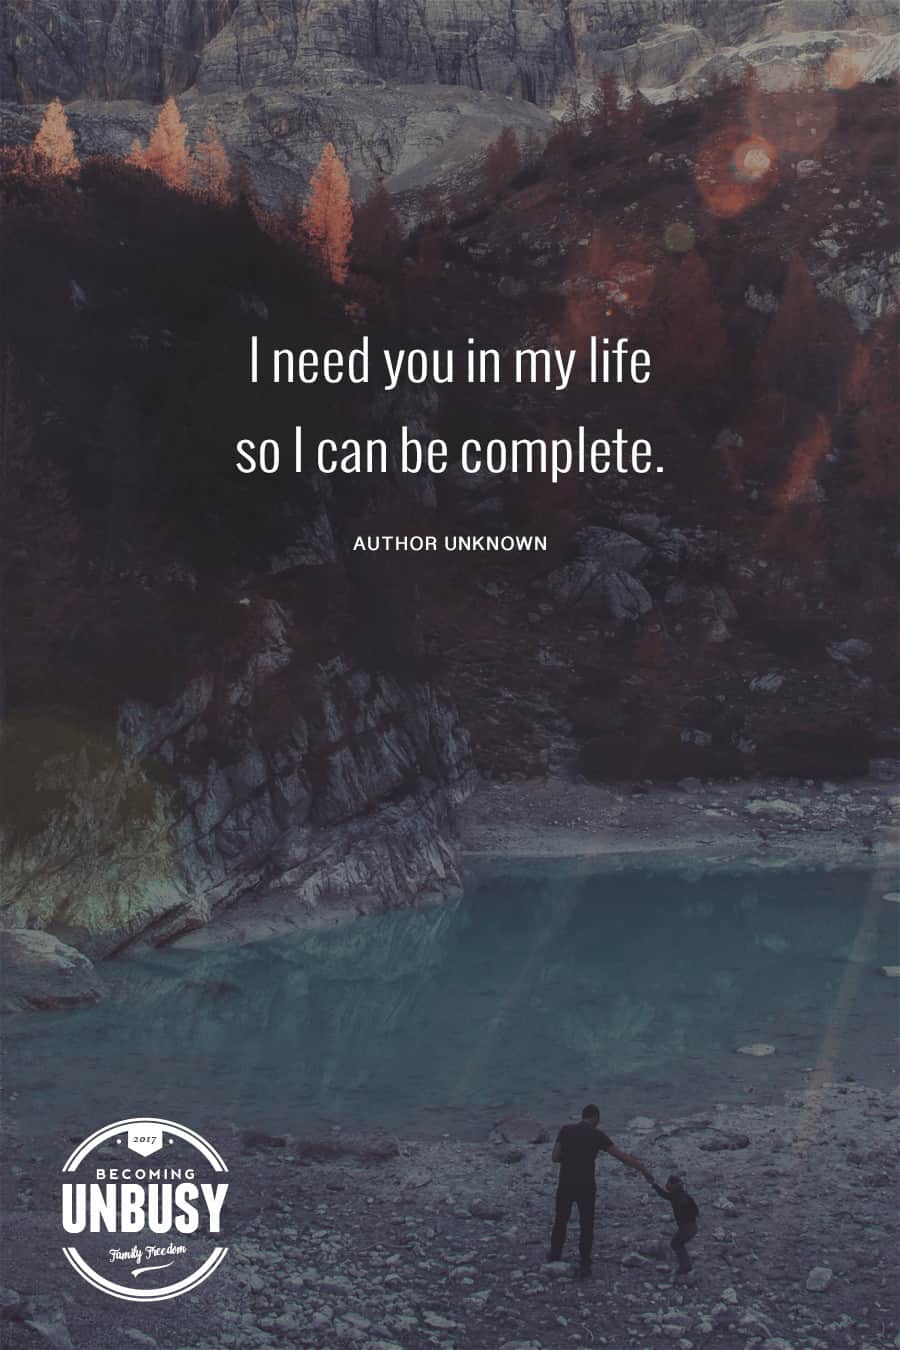 I need you in my life so I can be complete. #quote #BecomingUnbusy *love this video and site